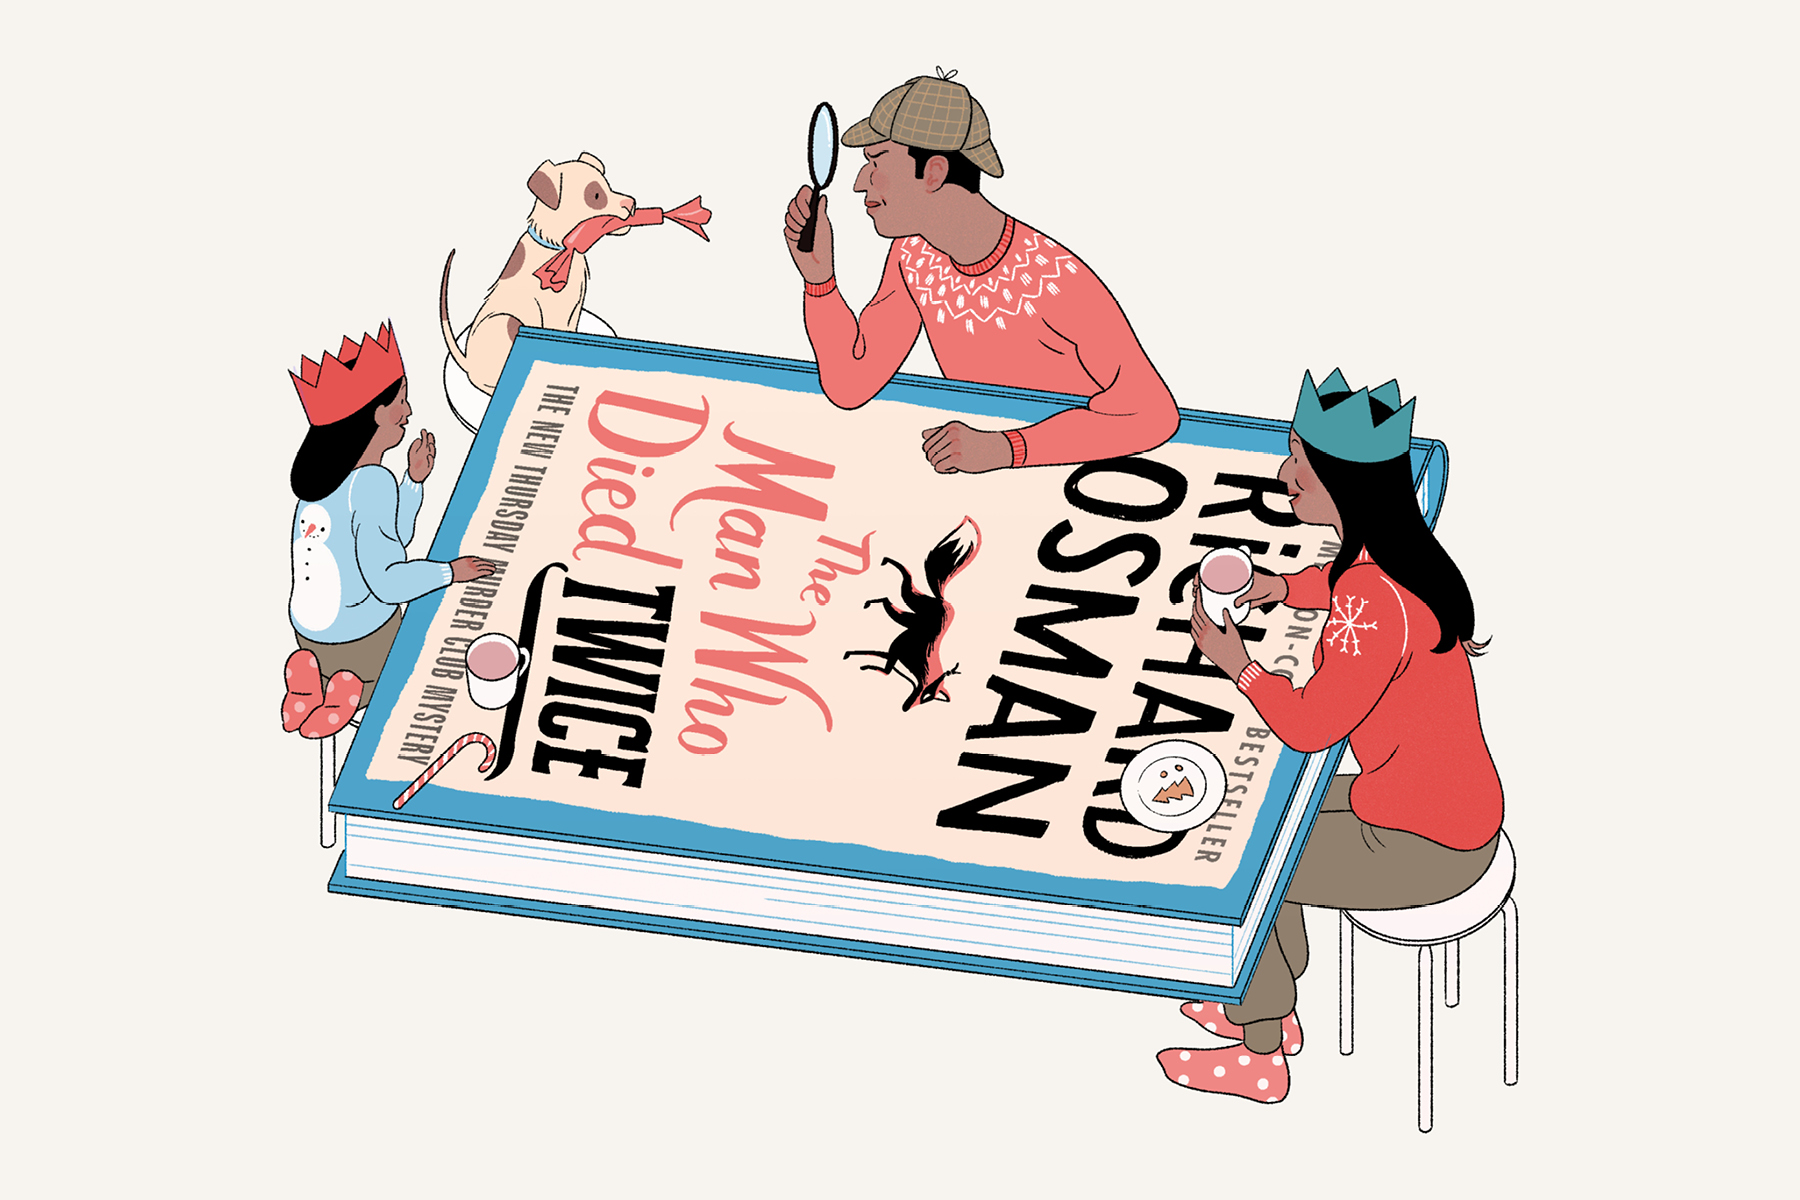 An illustration of crime readers, holding a magnifying glass, etc, gathered around a table whose top is Richard Osman's novel 'The Man Who Died Twice'.